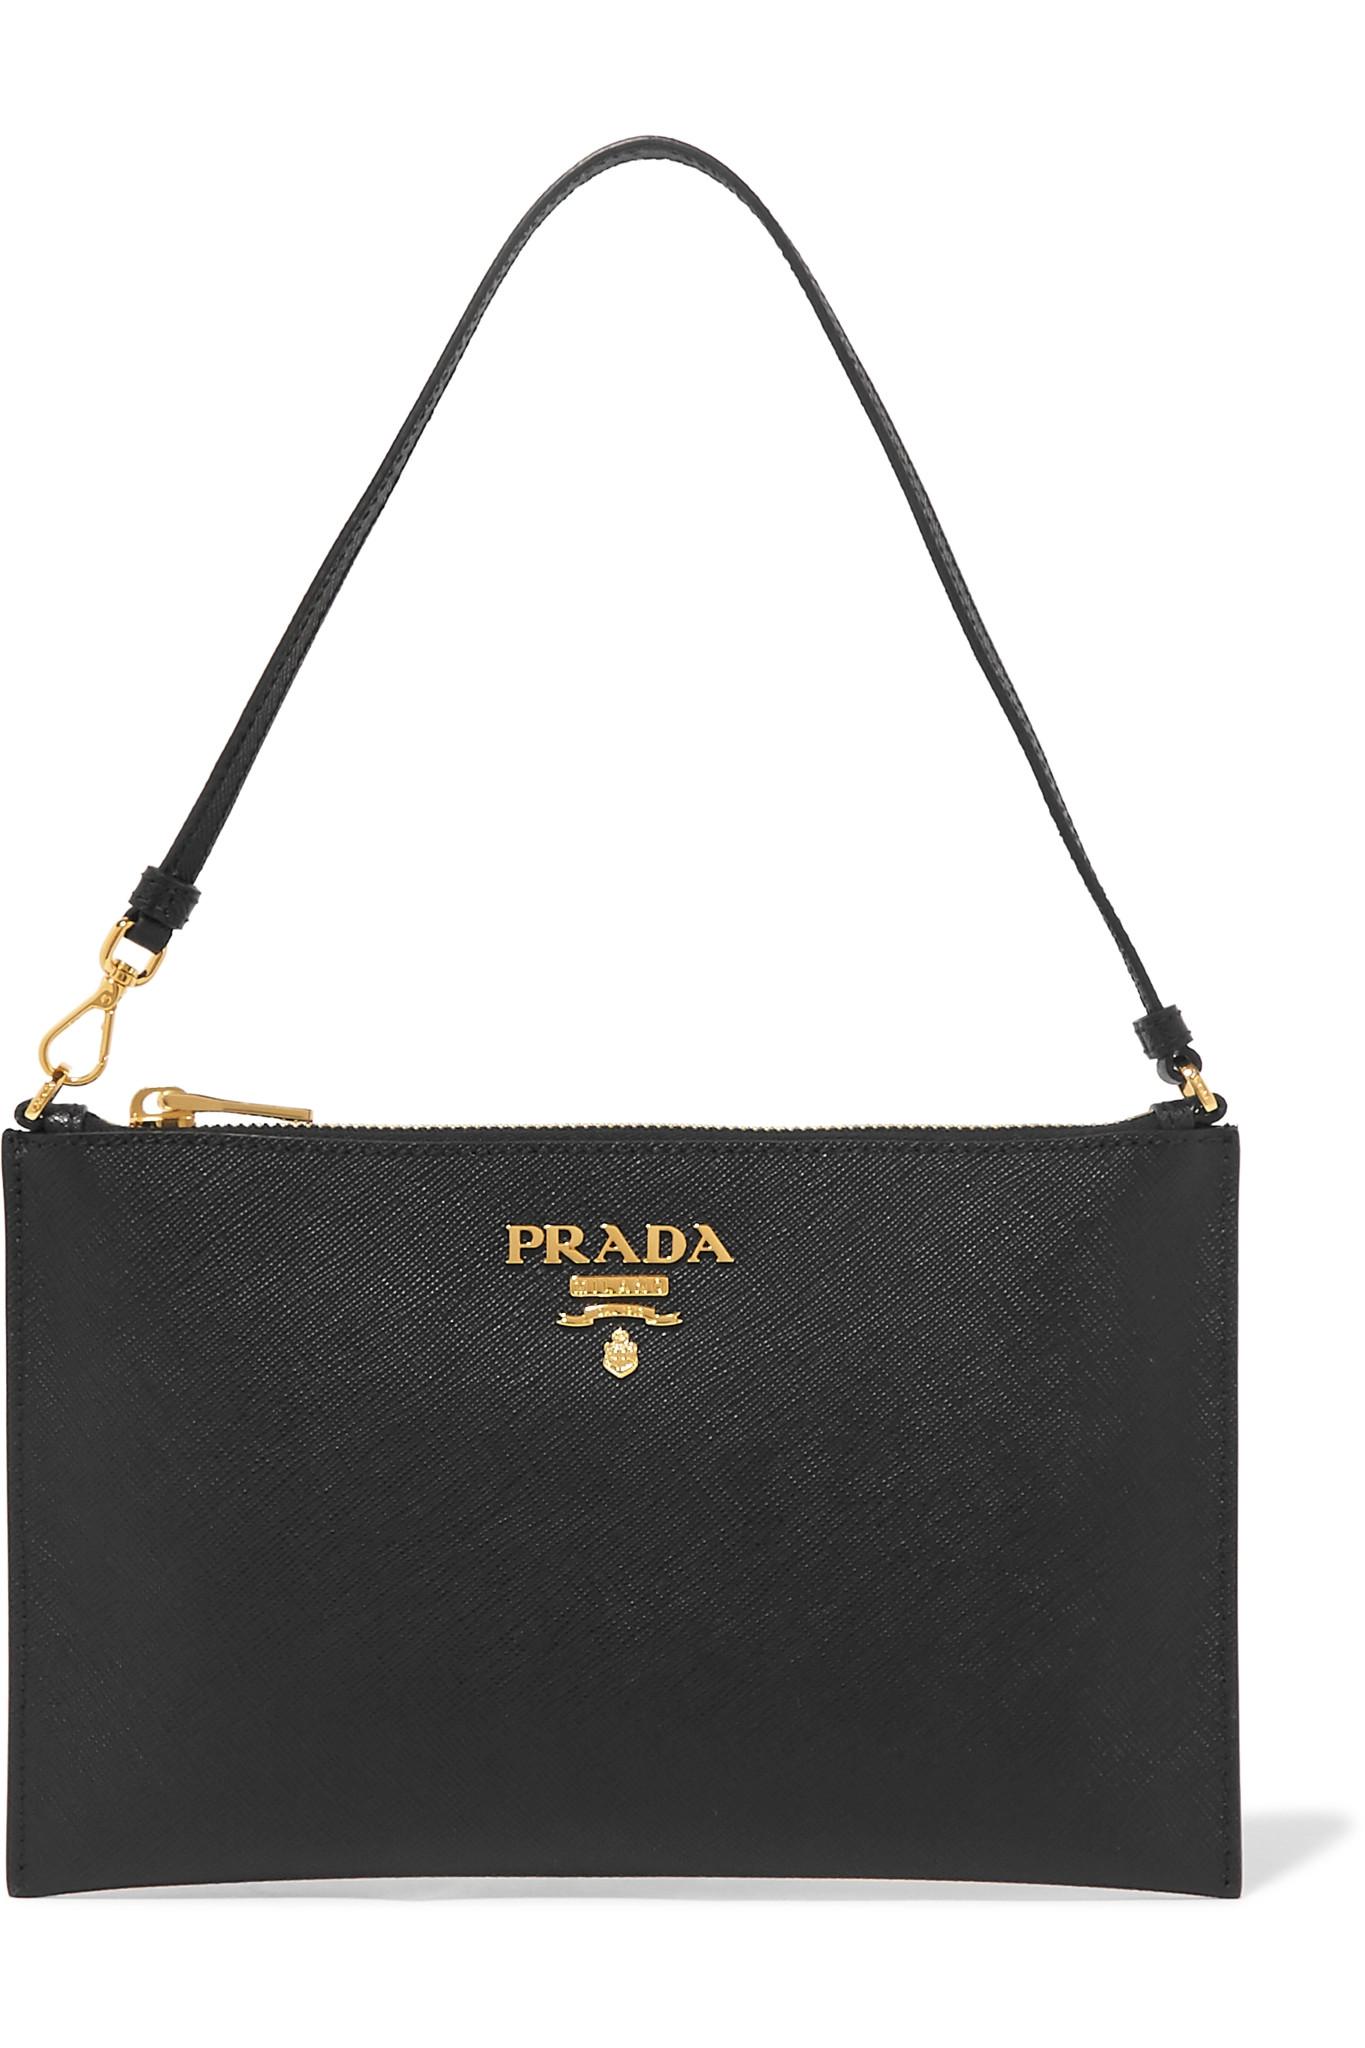 Prada Textured-leather Pouch in Black - Lyst